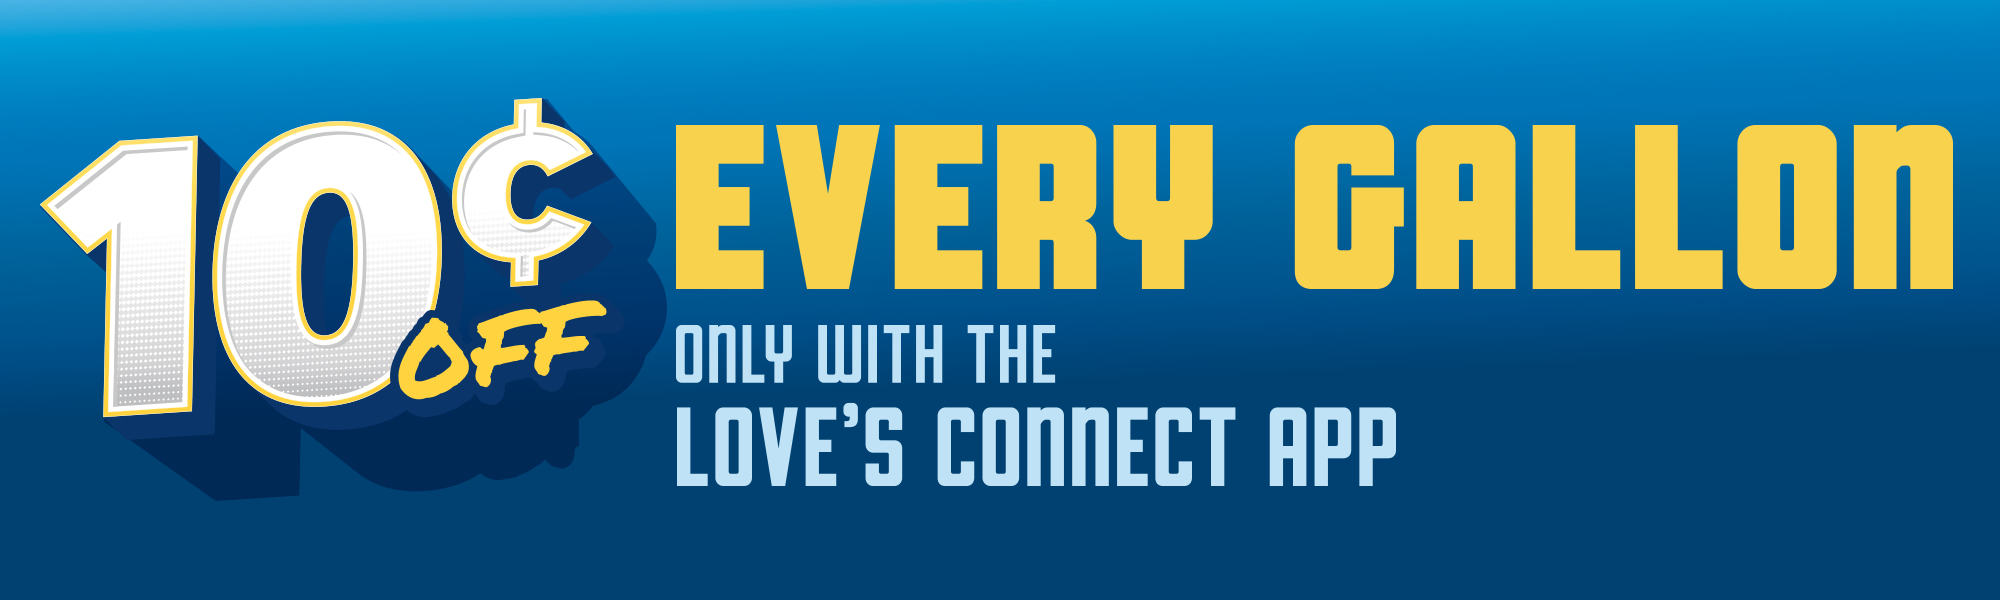 Save 10¢ off every gallon with the Love's Connect App graphic